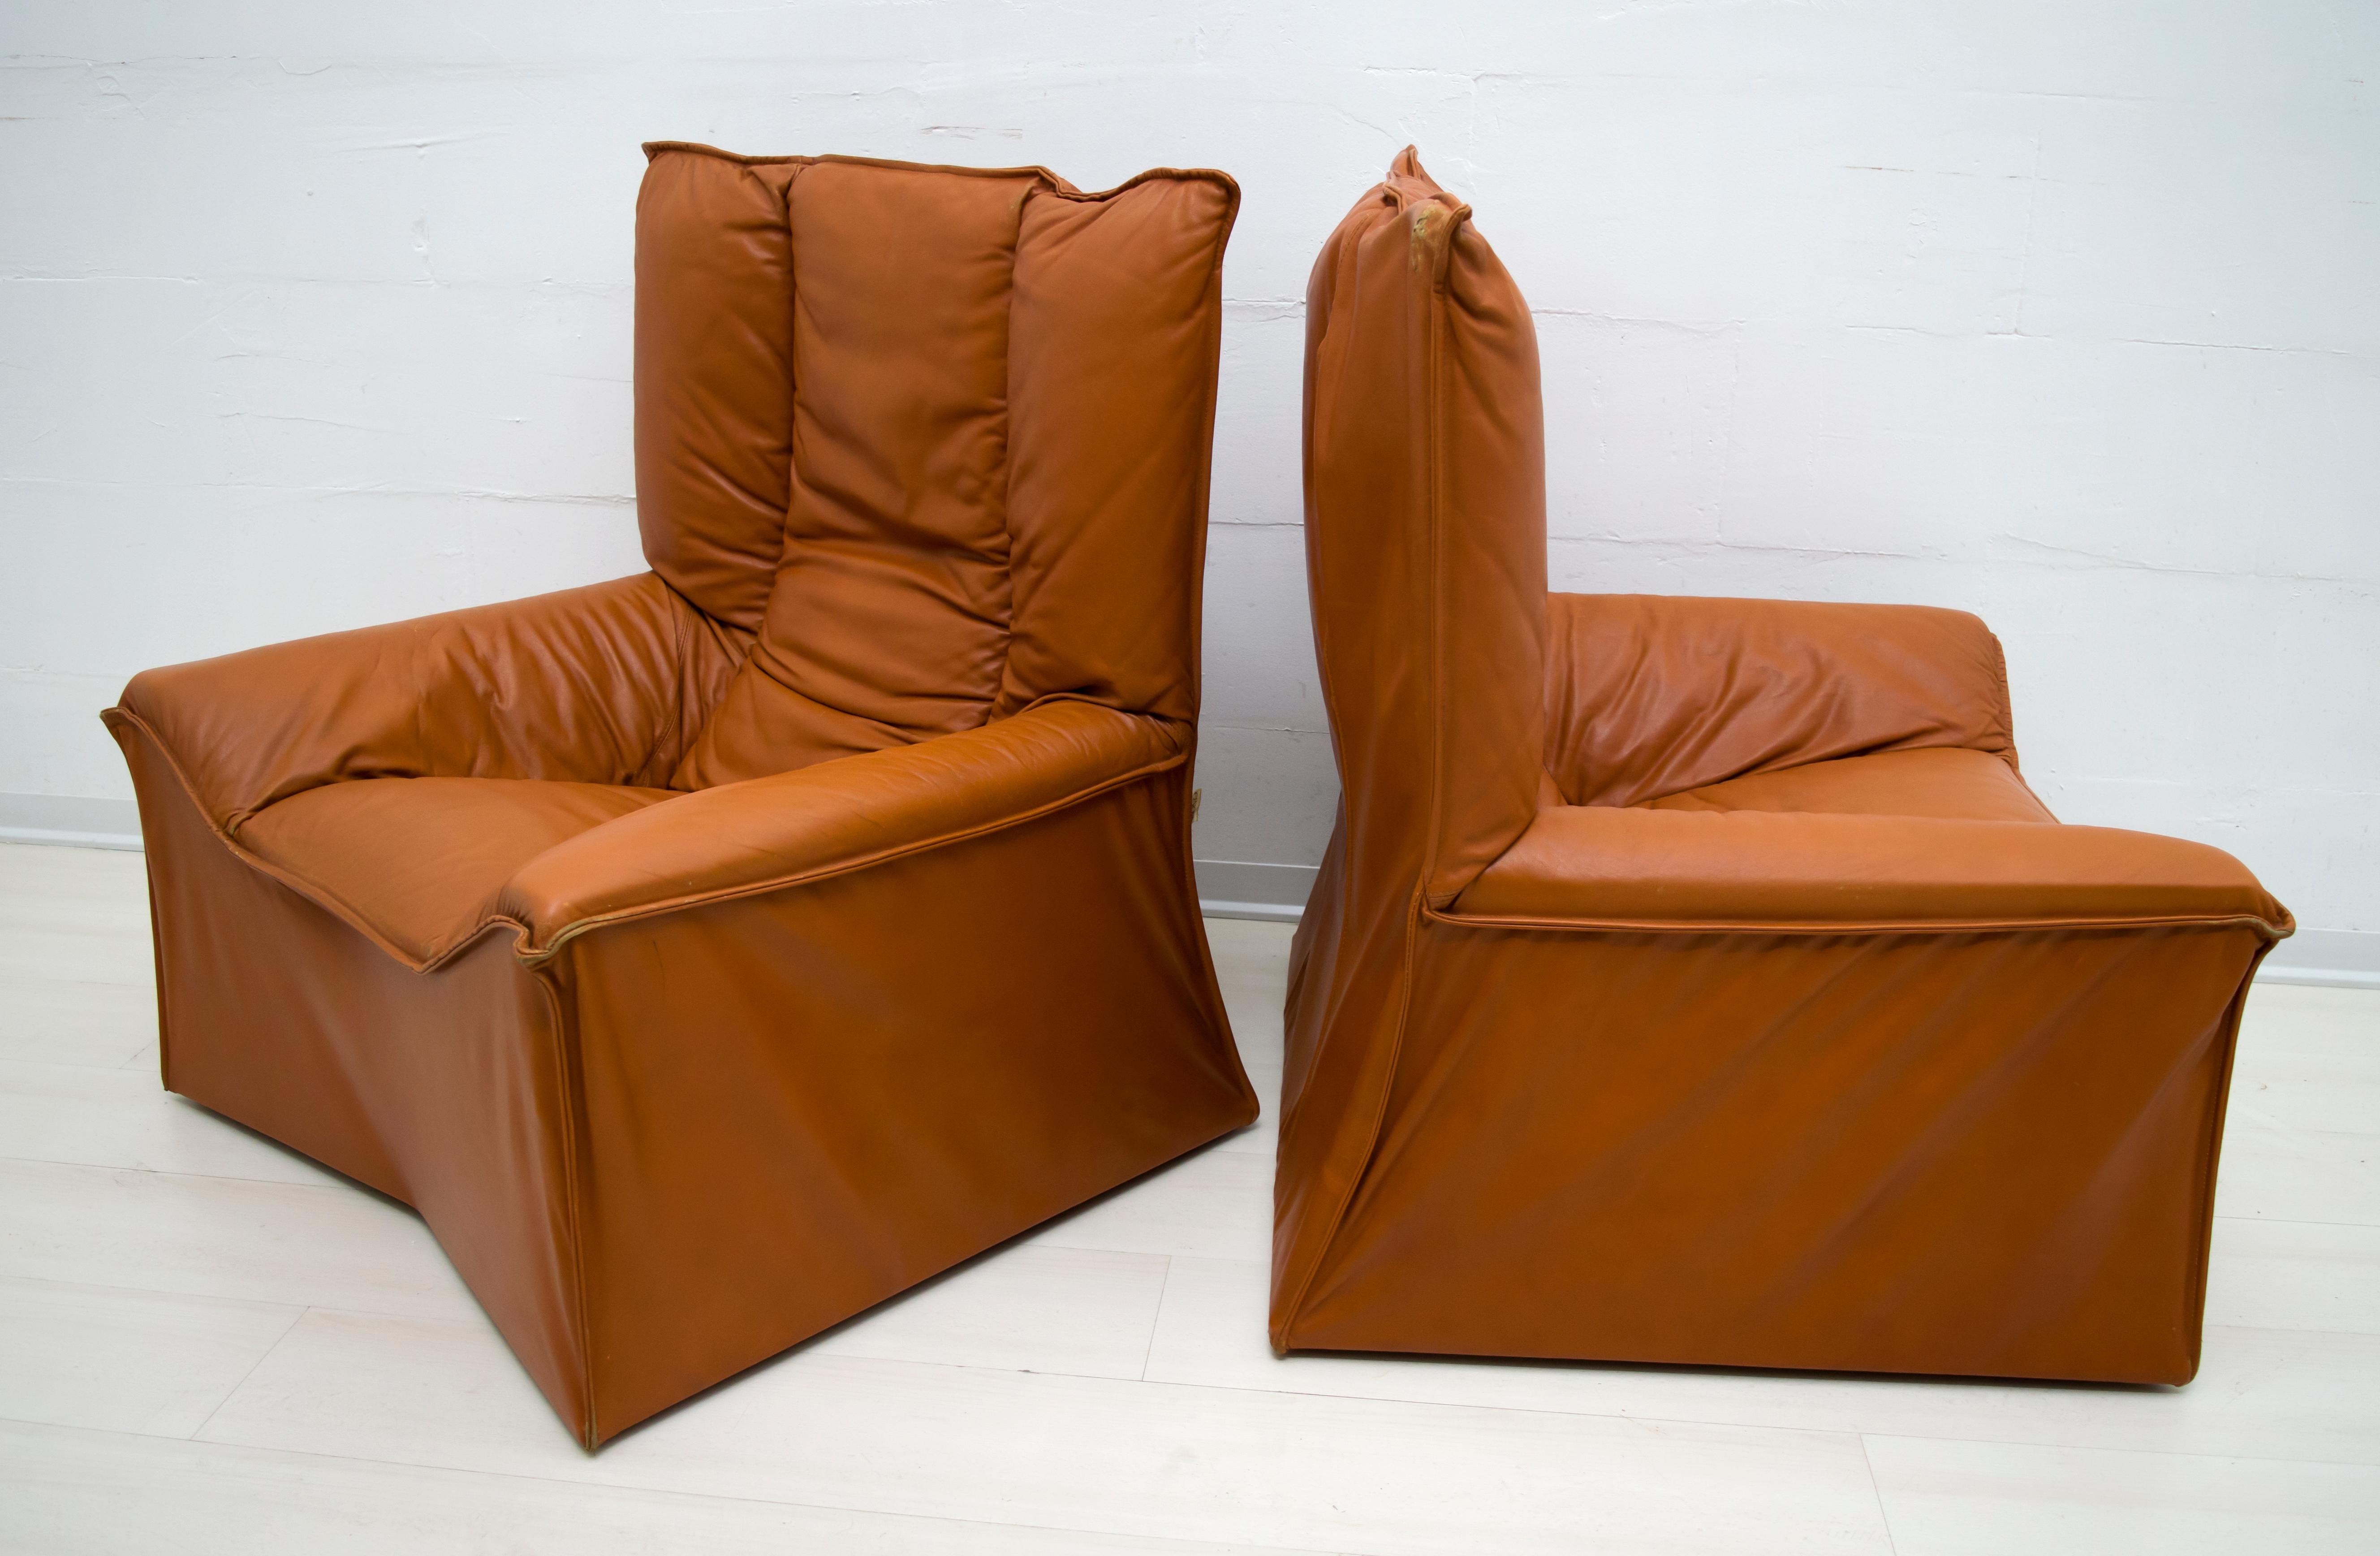 Pair of Mid-Century Modern Italian Real Leather Armchairs by Cinova, 1964s For Sale 1